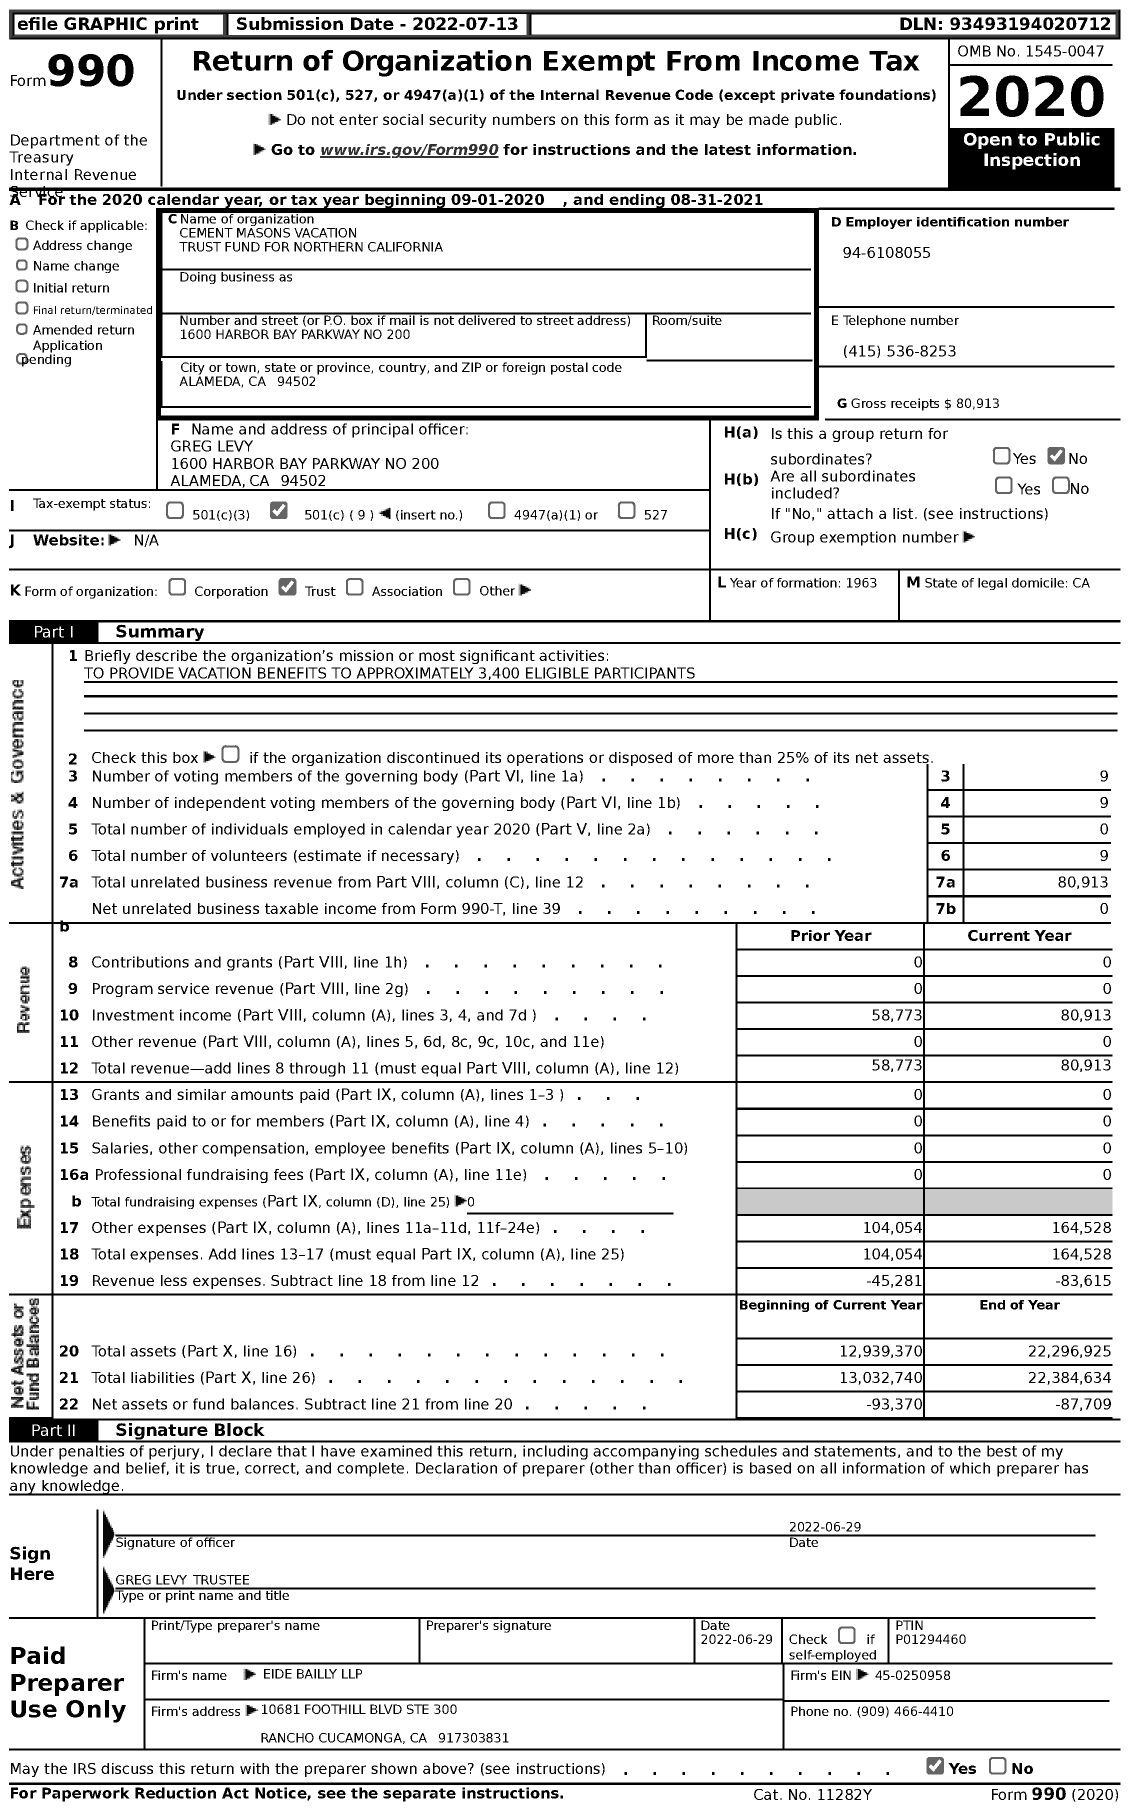 Image of first page of 2020 Form 990 for Cement Masons Vacation Trust Fund for Northern California